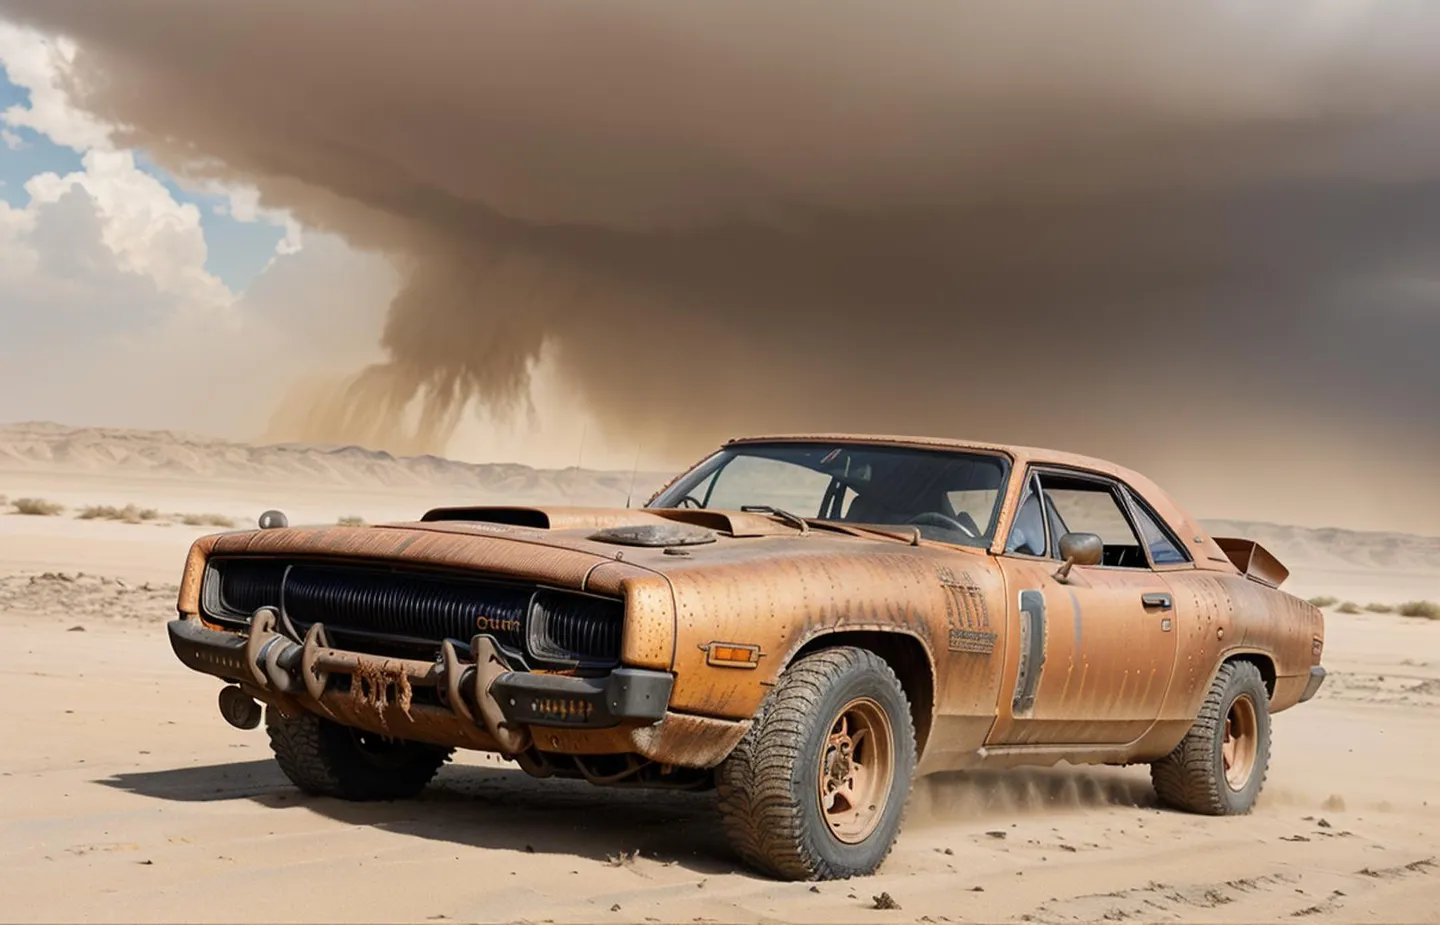 A post-apocalyptic car with rusted features parked in a desert under an impending storm. AI generated image using Stable Diffusion.